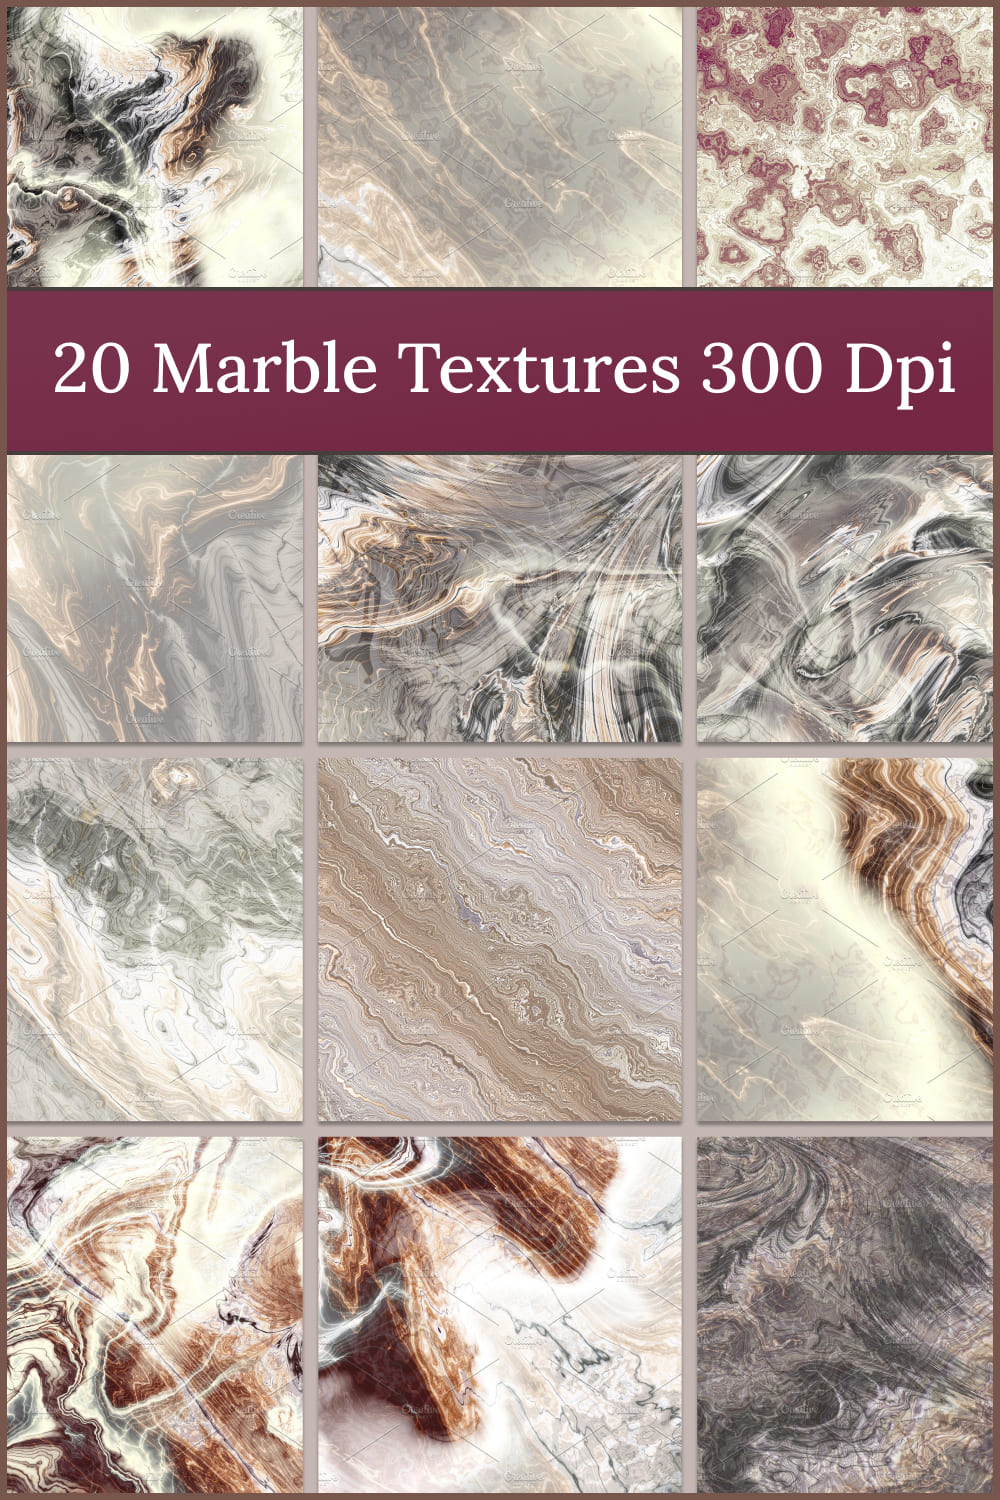 20 marble textures 300 dpi - pinterest image preview.